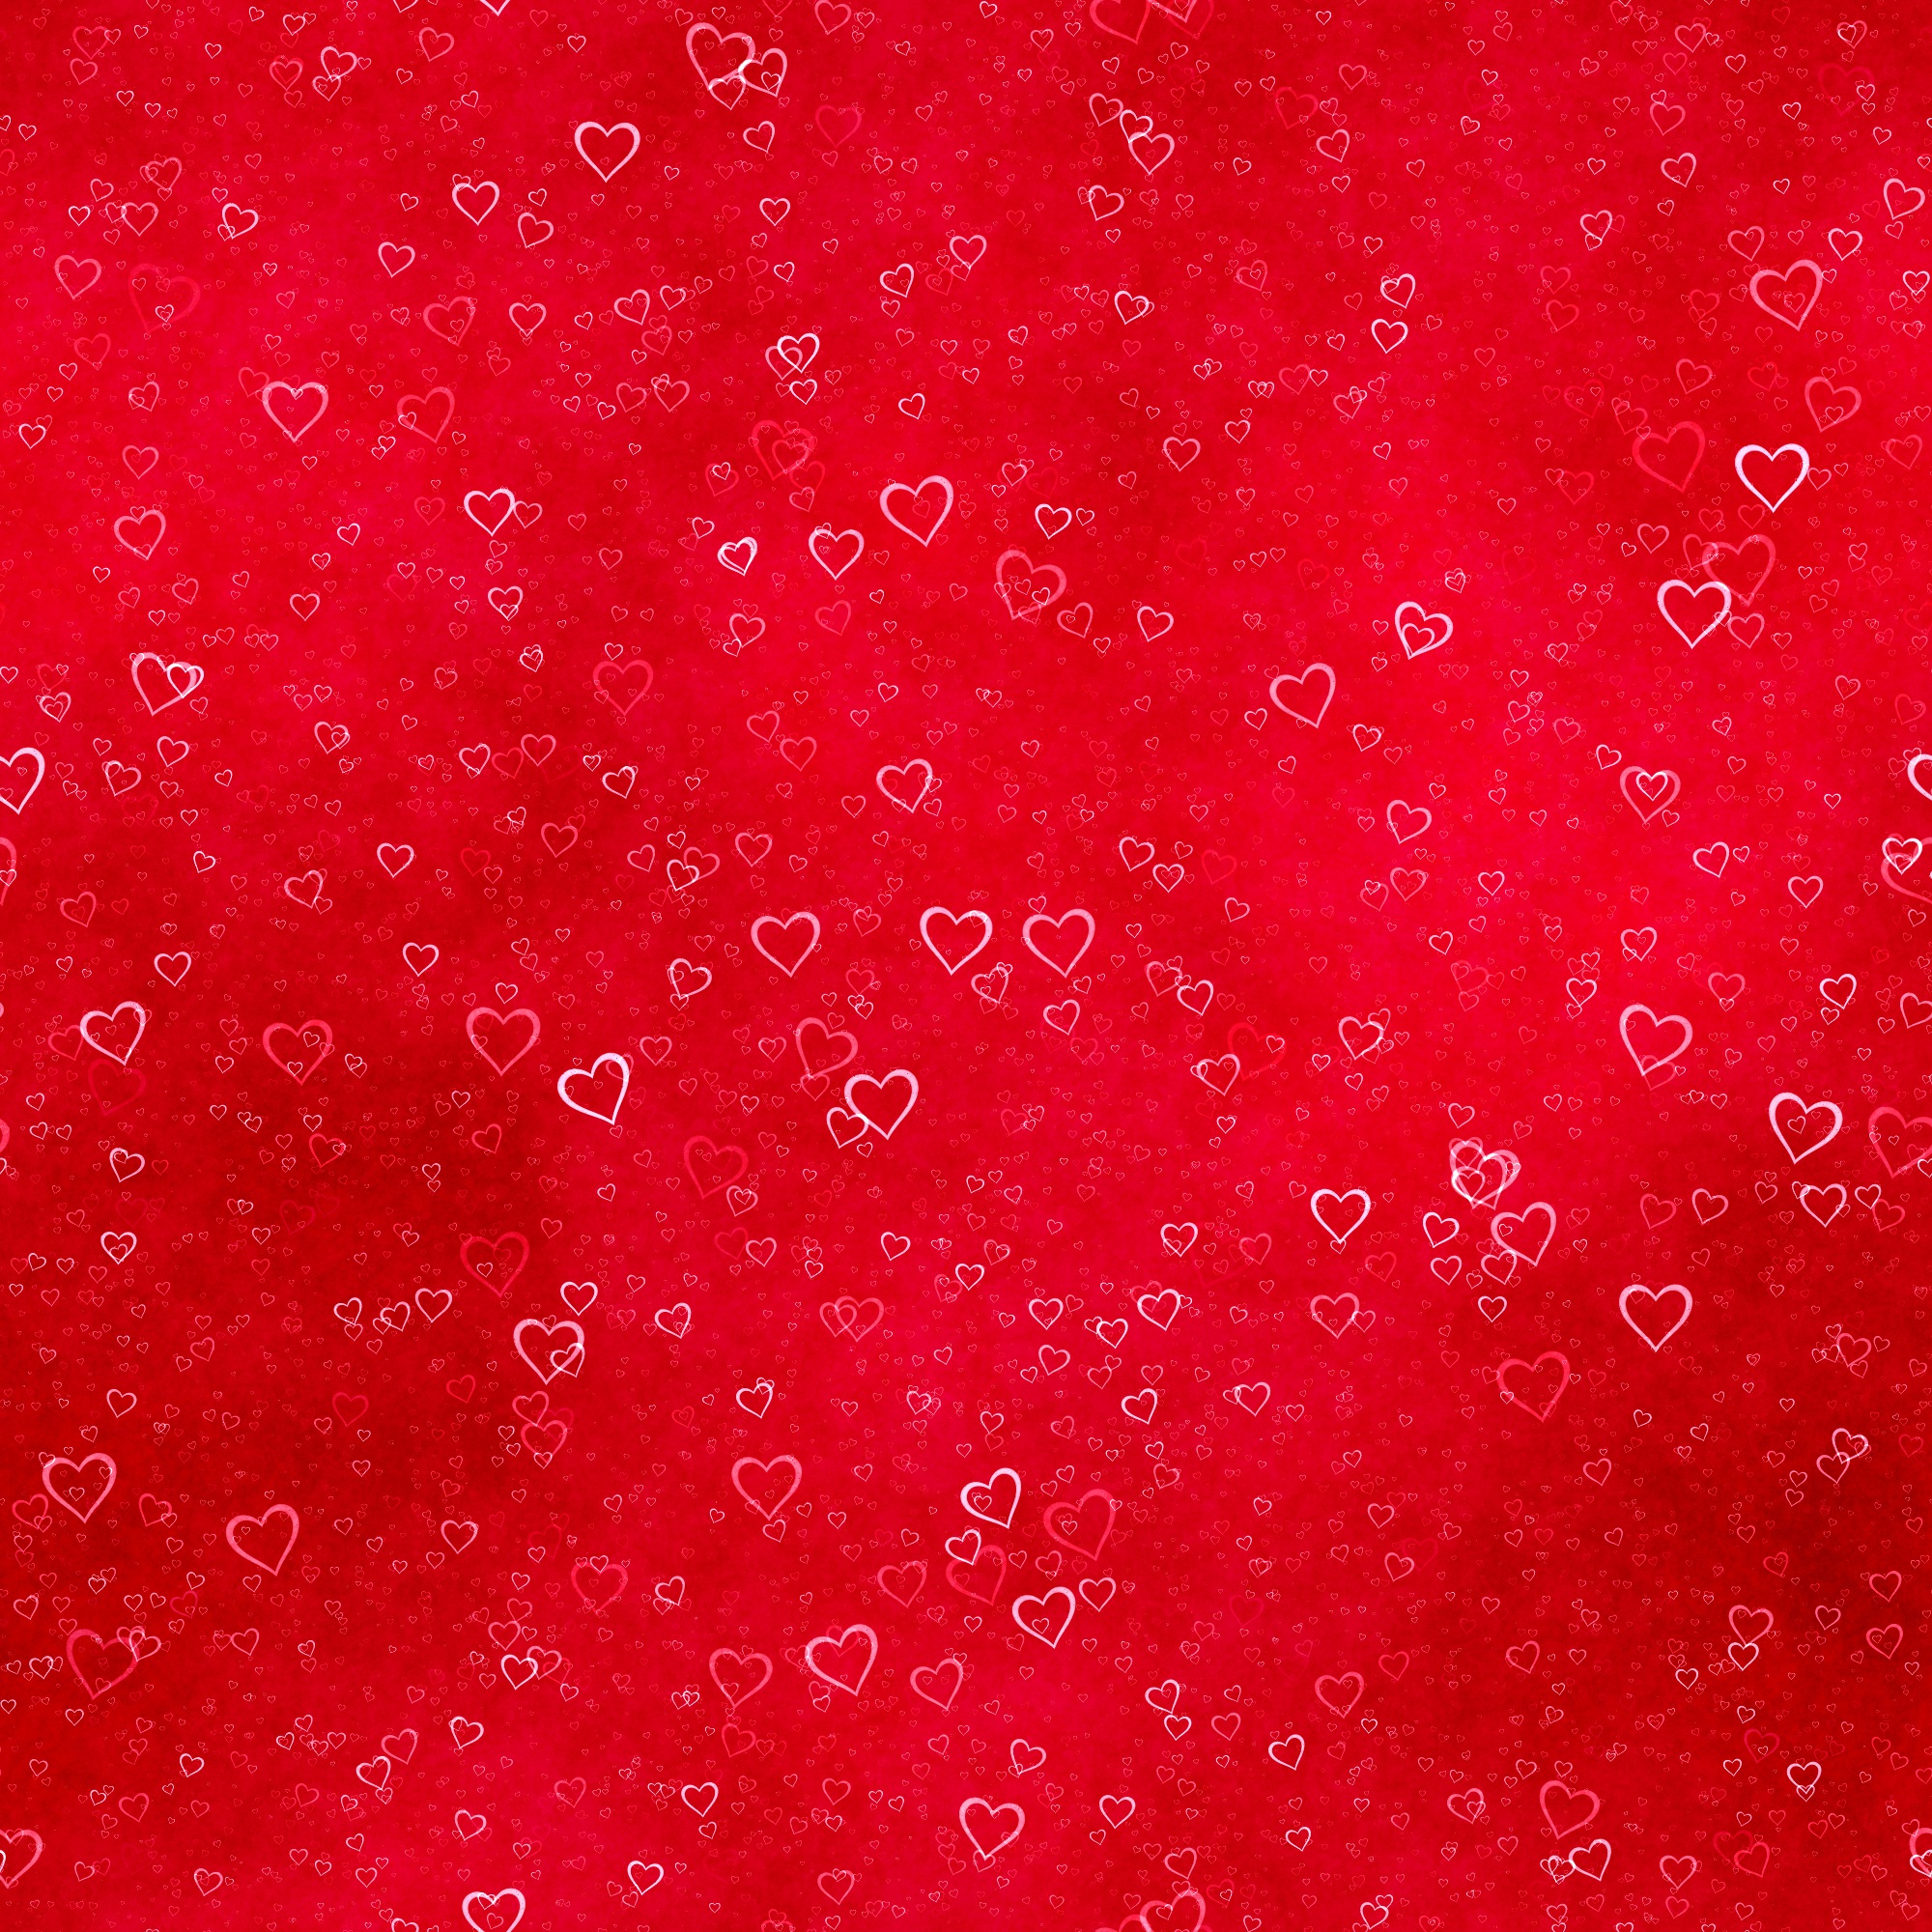 hearts, love, red, texture cell phone wallpapers